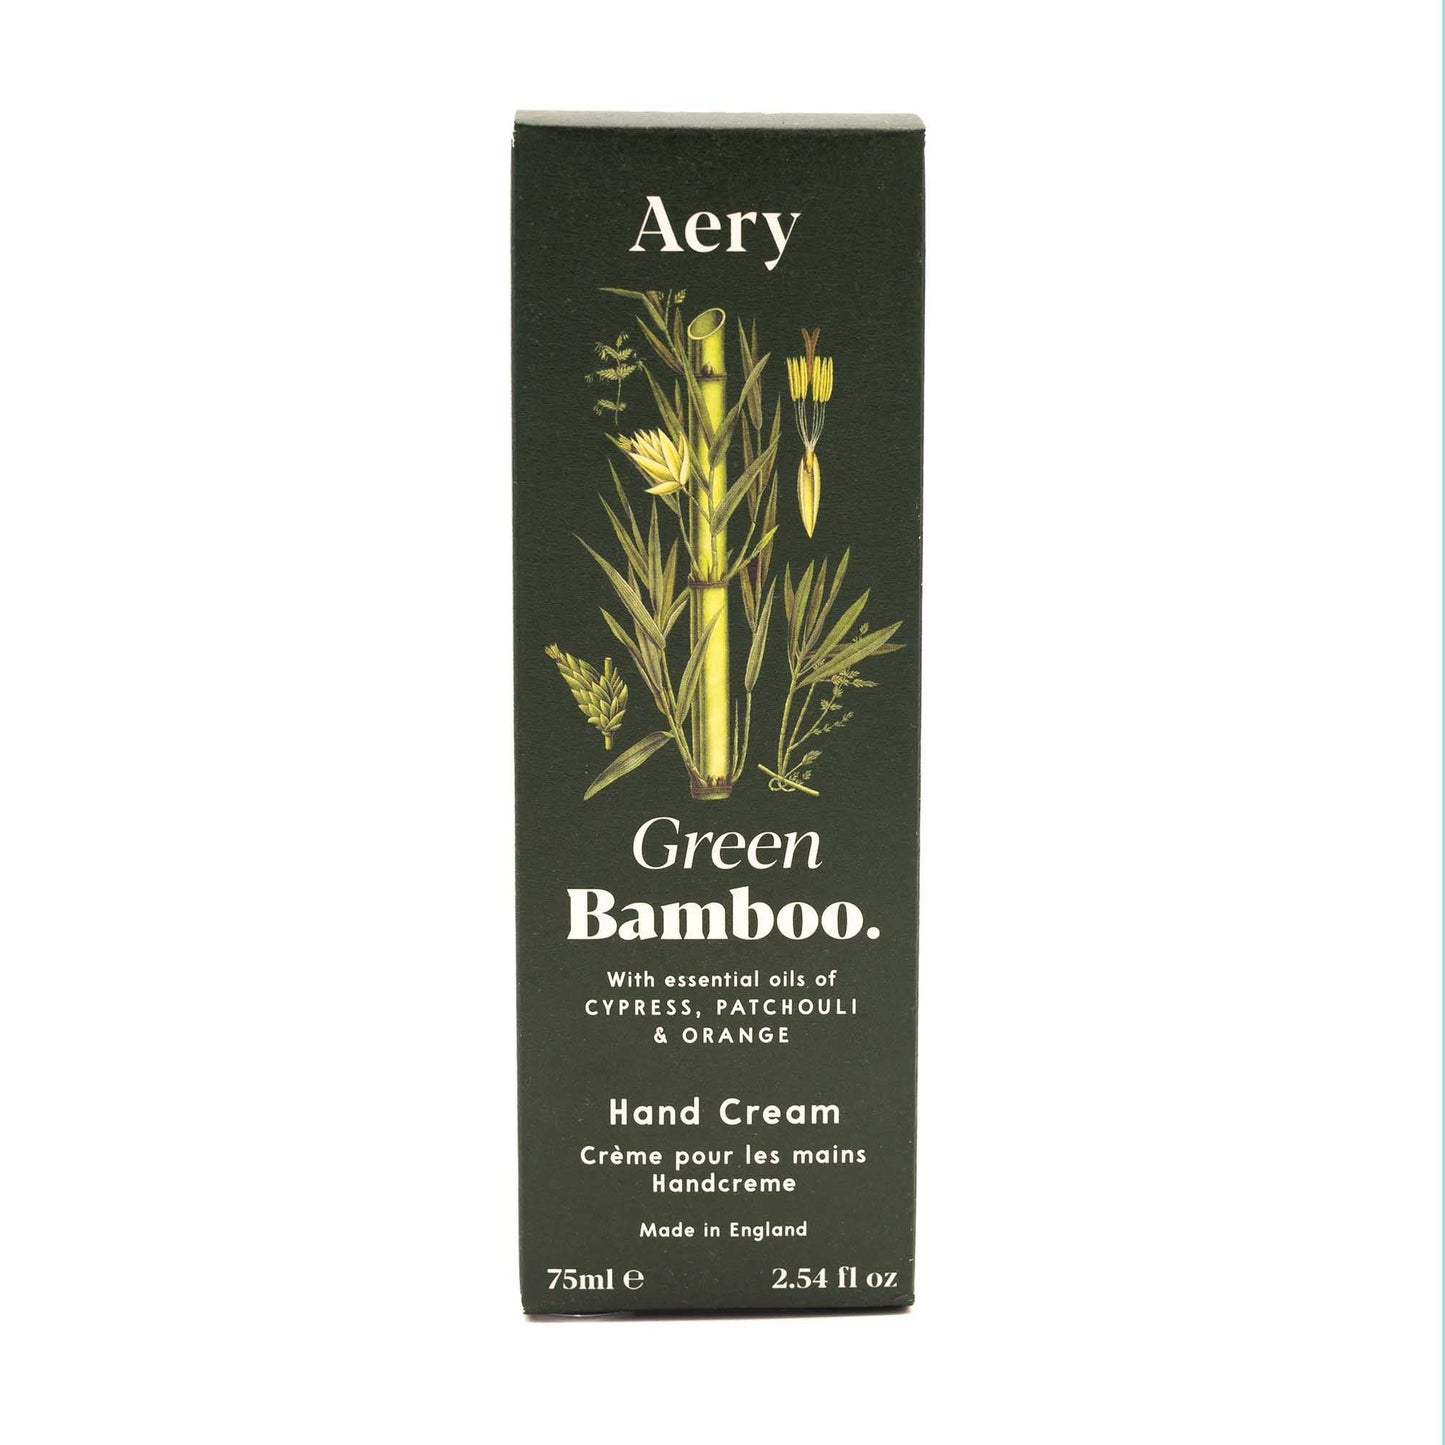 The dark green boc the hand cream arrives in. An illustrated bamboo is taking up a third of the box while white text reads, aery, green bambo, hand cream.